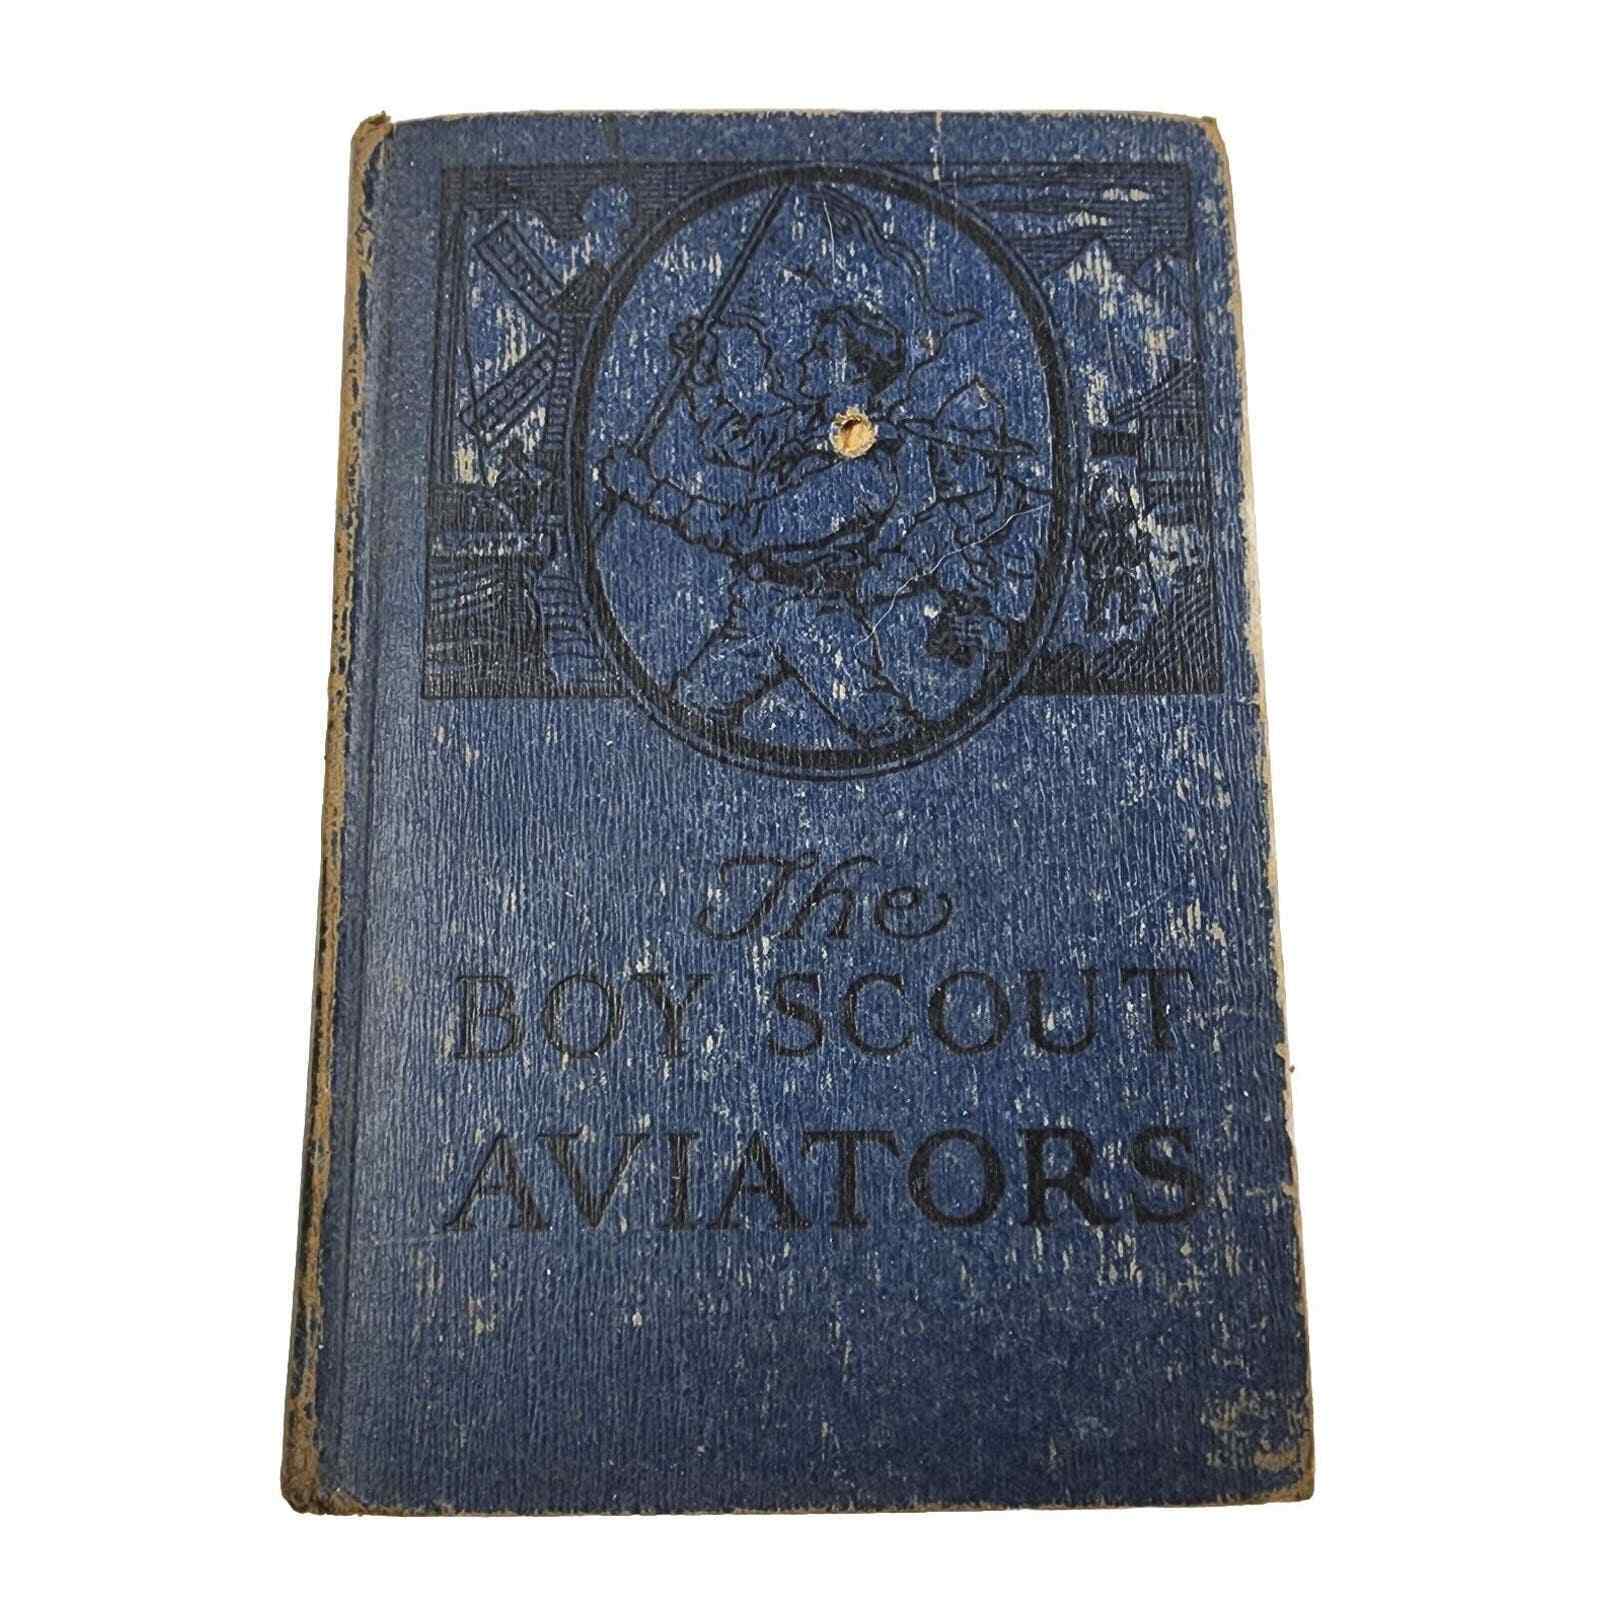 Antique Book 1921, The Boy Scout Aviators by George Durston